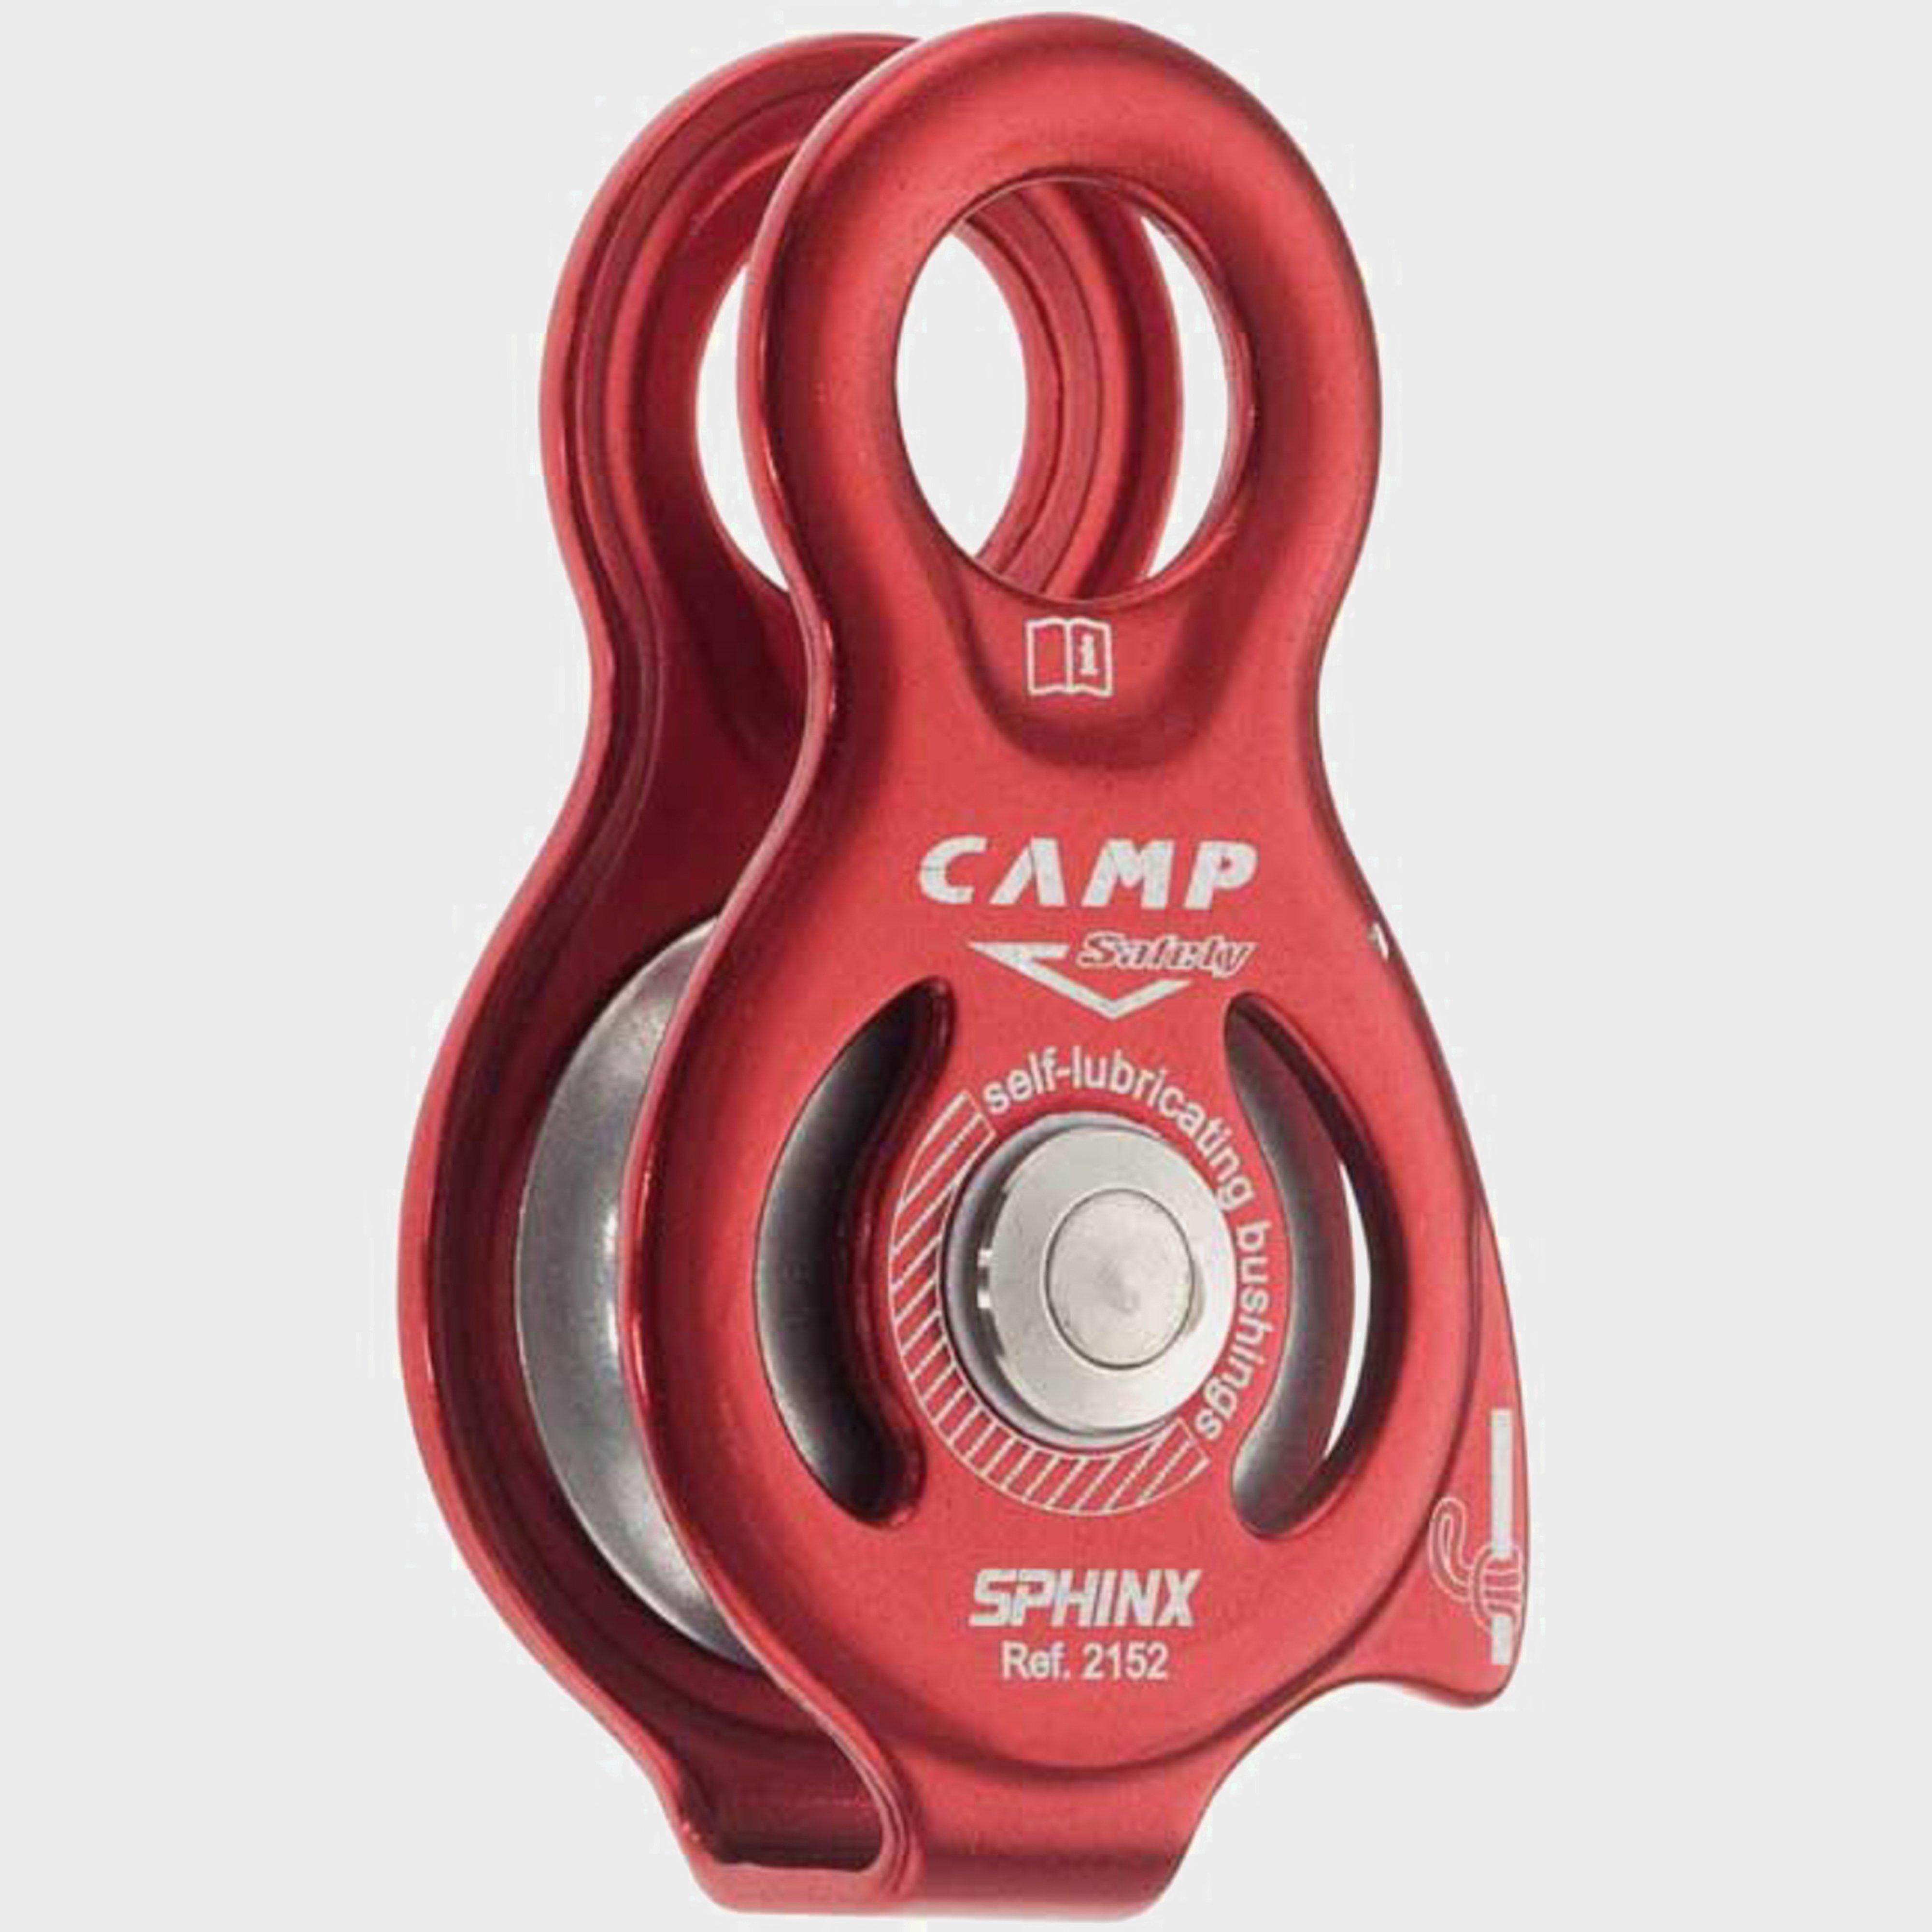 Camp Sphinx Pulley - Red/pulley  Red/pulley